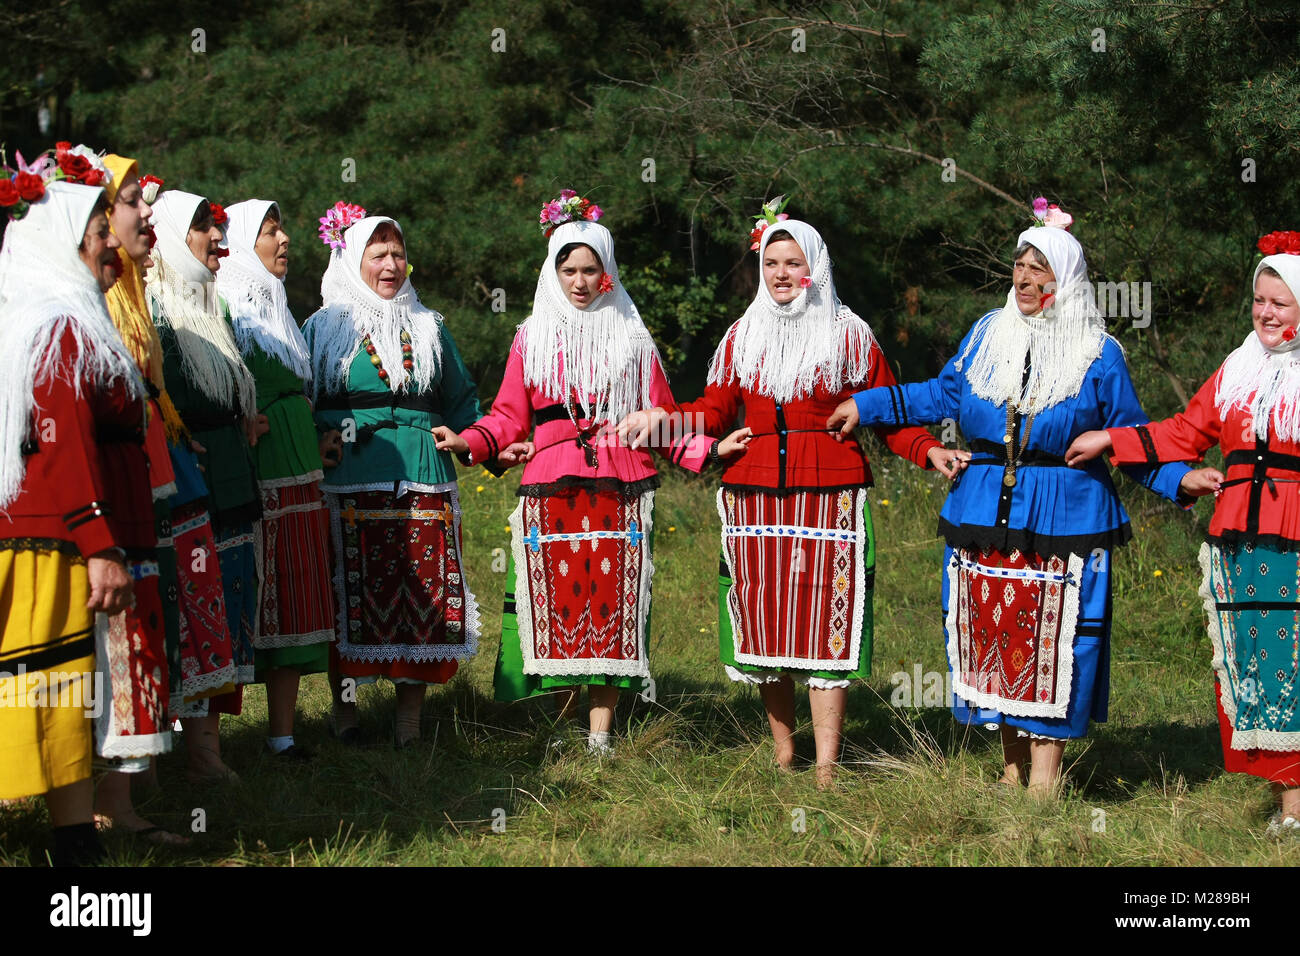 People in traditional folk costume of The National Folklore Fair in ...